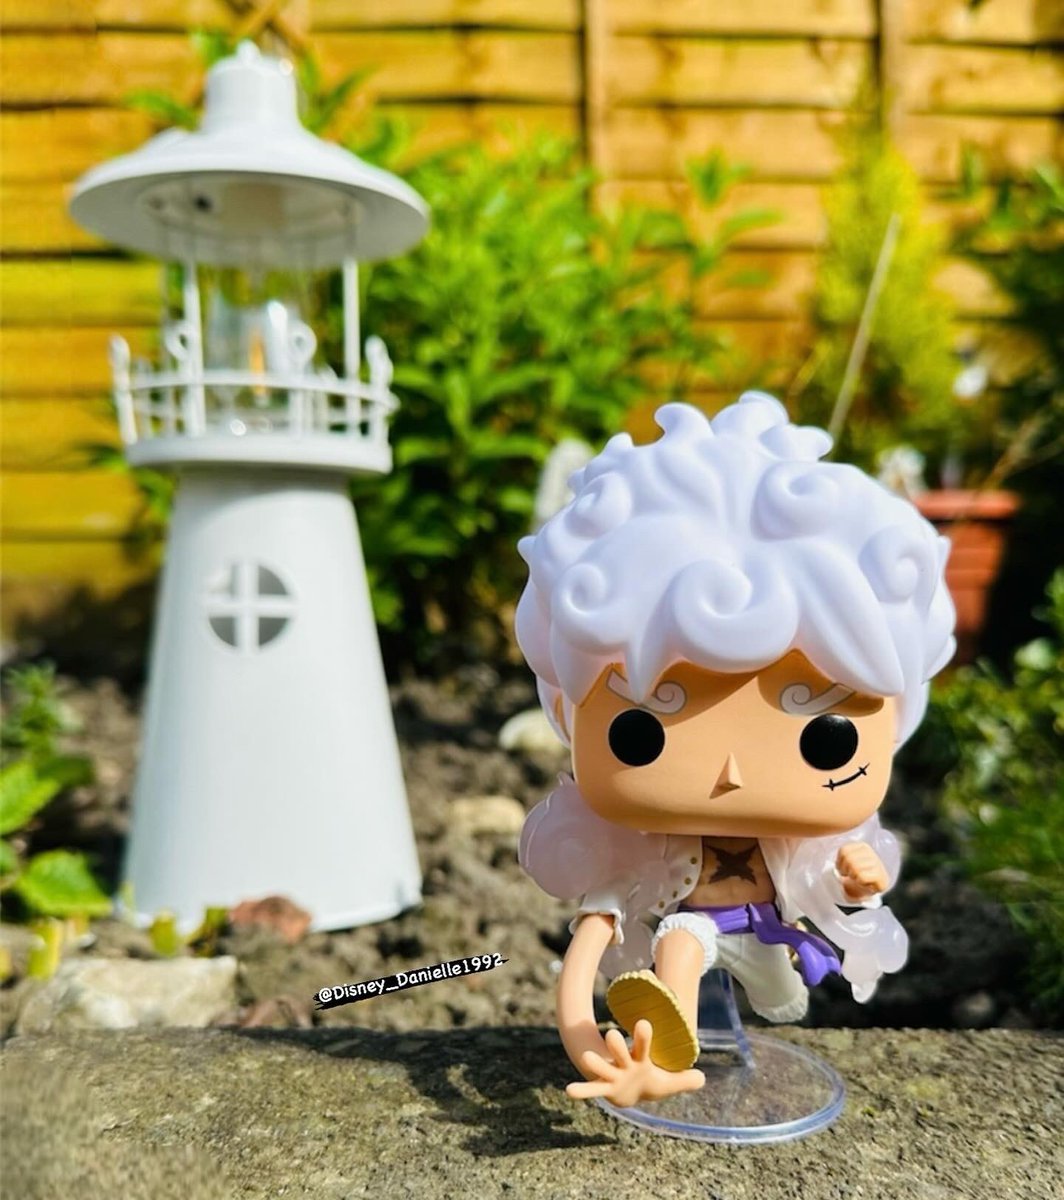 Couldn’t resist heading outside to take some out of box pics of my Luffy chase! He is absolutely insane! 😍 Wish I was an out of box collector cause this one looks sooo cool unboxed! 🤩

#FunkoPOPVinyl #MyFunkoStory #FunkoUnboxed #Funko

@OriginalFunko @FunkoEurope @funko_funime